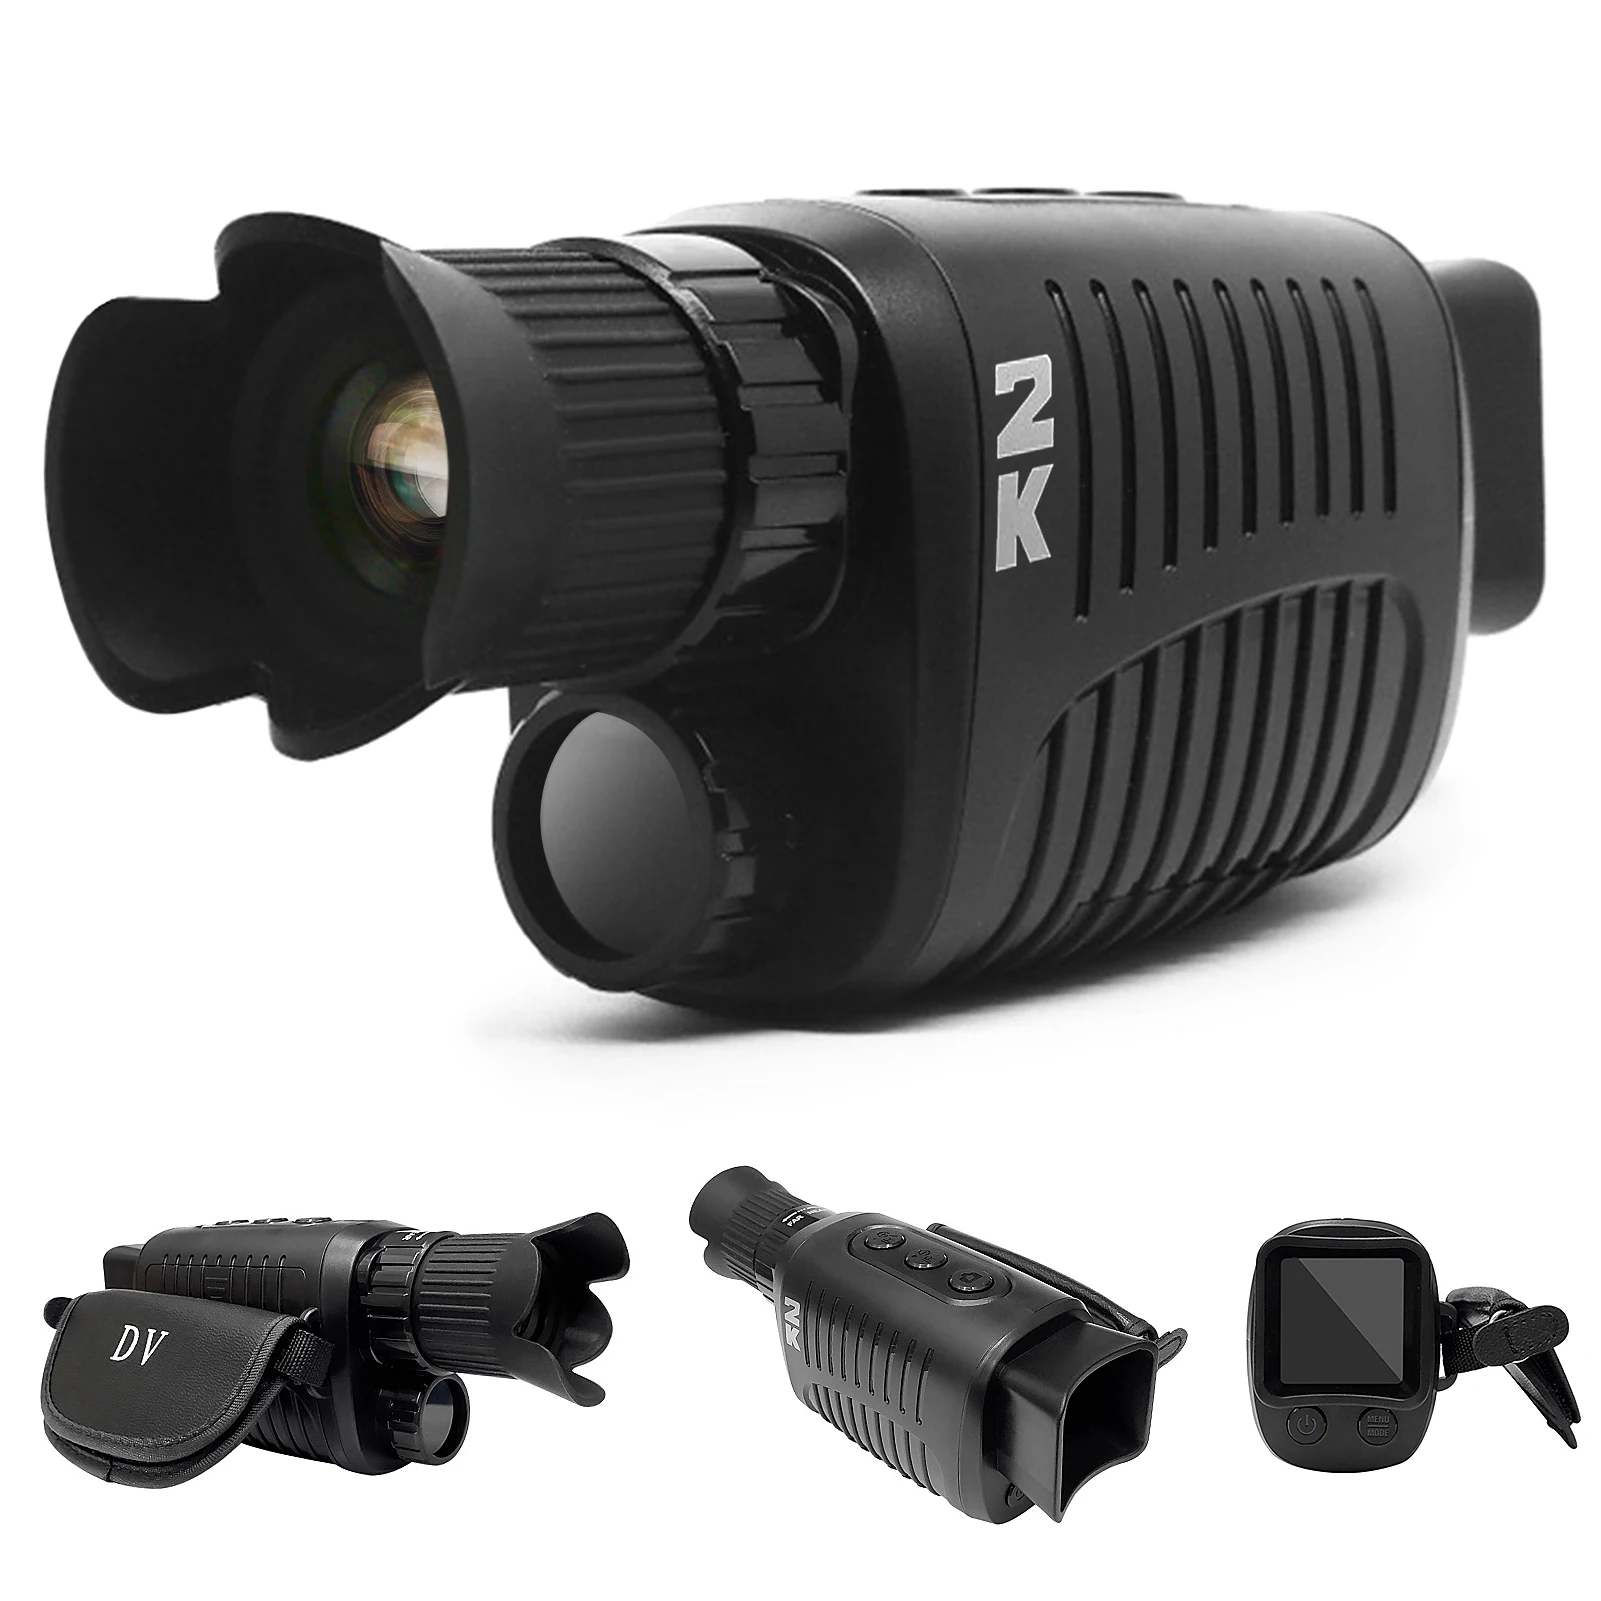 2K Monocular 5X Digital Zoom Digital High Definition Infrared Night Vision with 1.5'' Display Screen Outdoor Camping Hunting